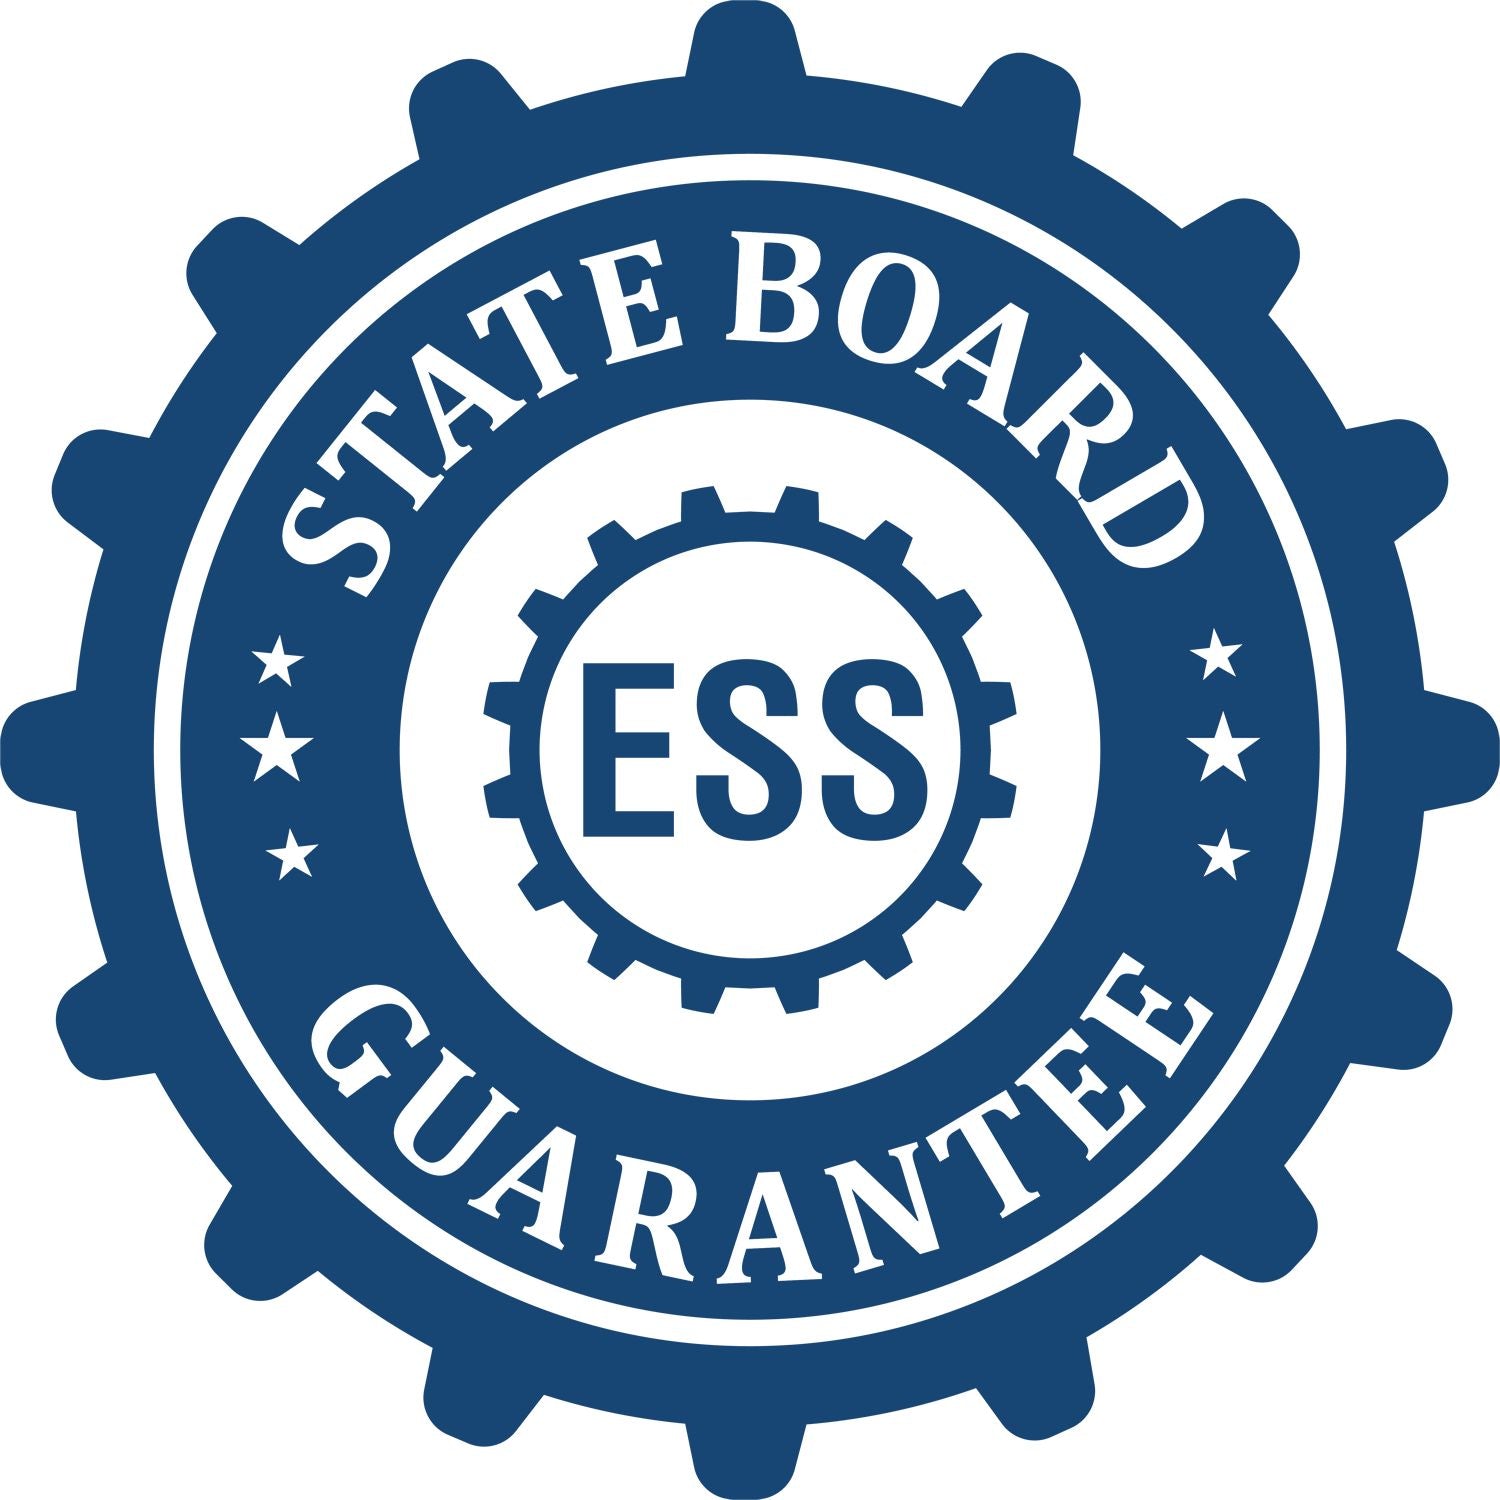 An emblem in a gear shape illustrating a state board guarantee for the Connecticut Desk Landscape Architectural Seal Embosser product.